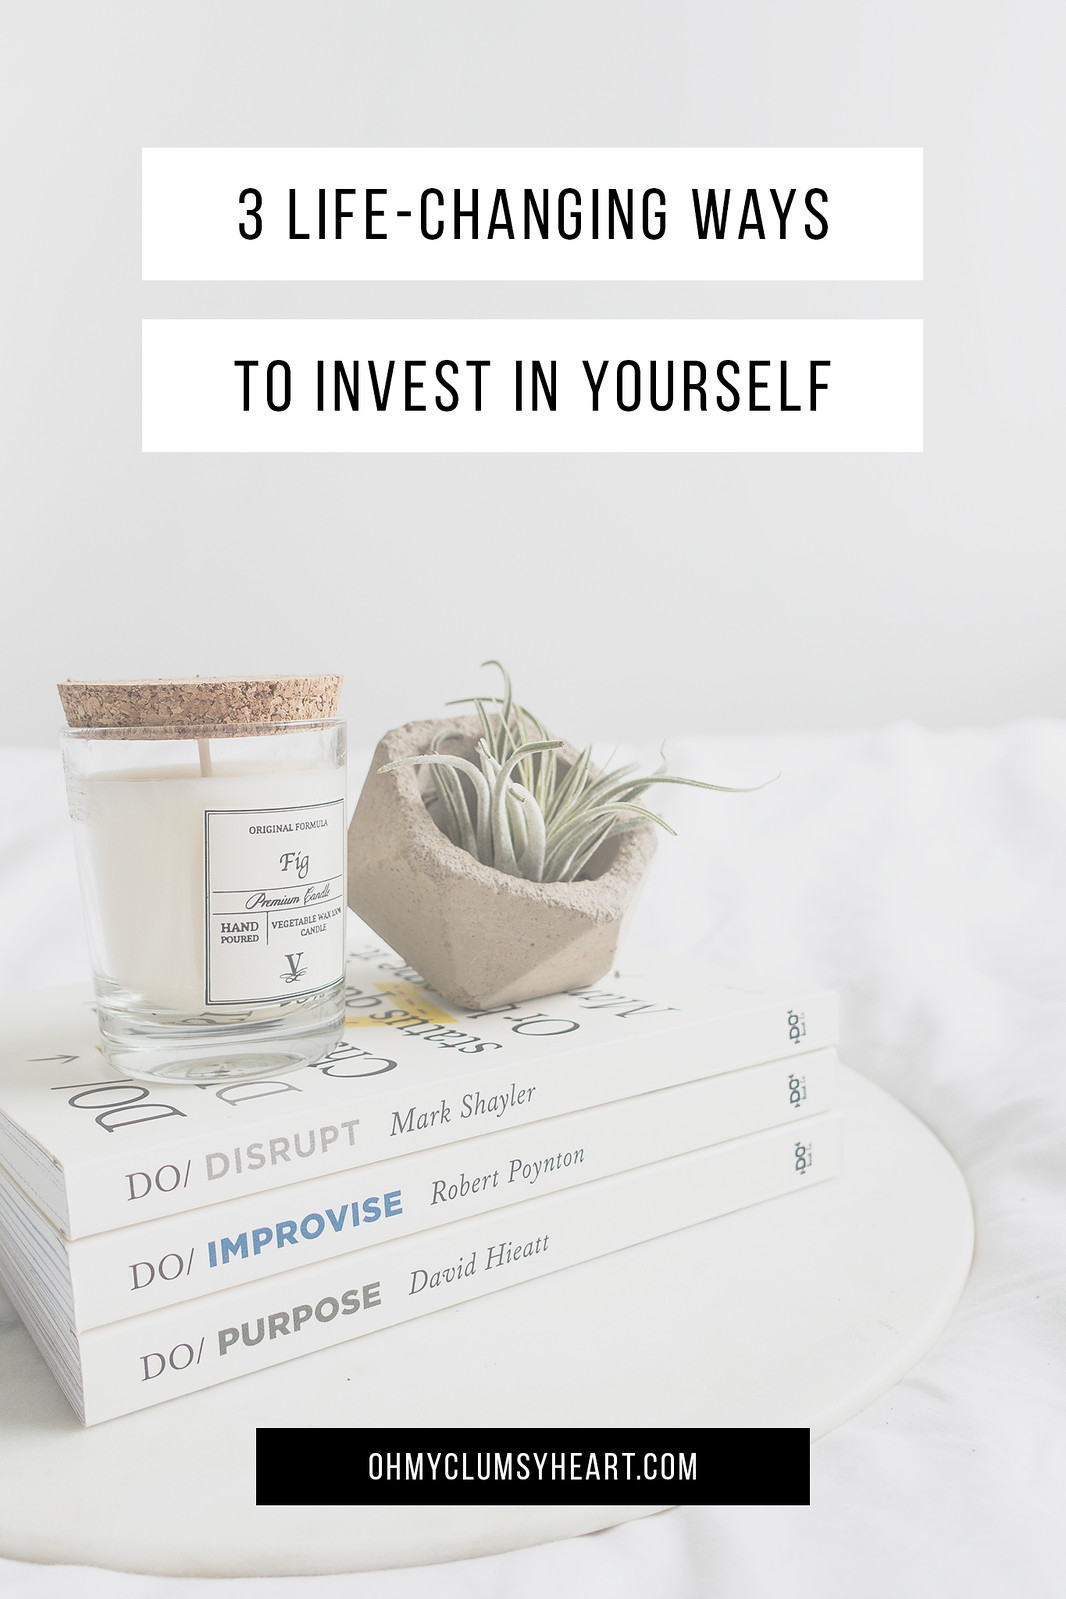 3 Life-Changing Ways To Invest In Yourself